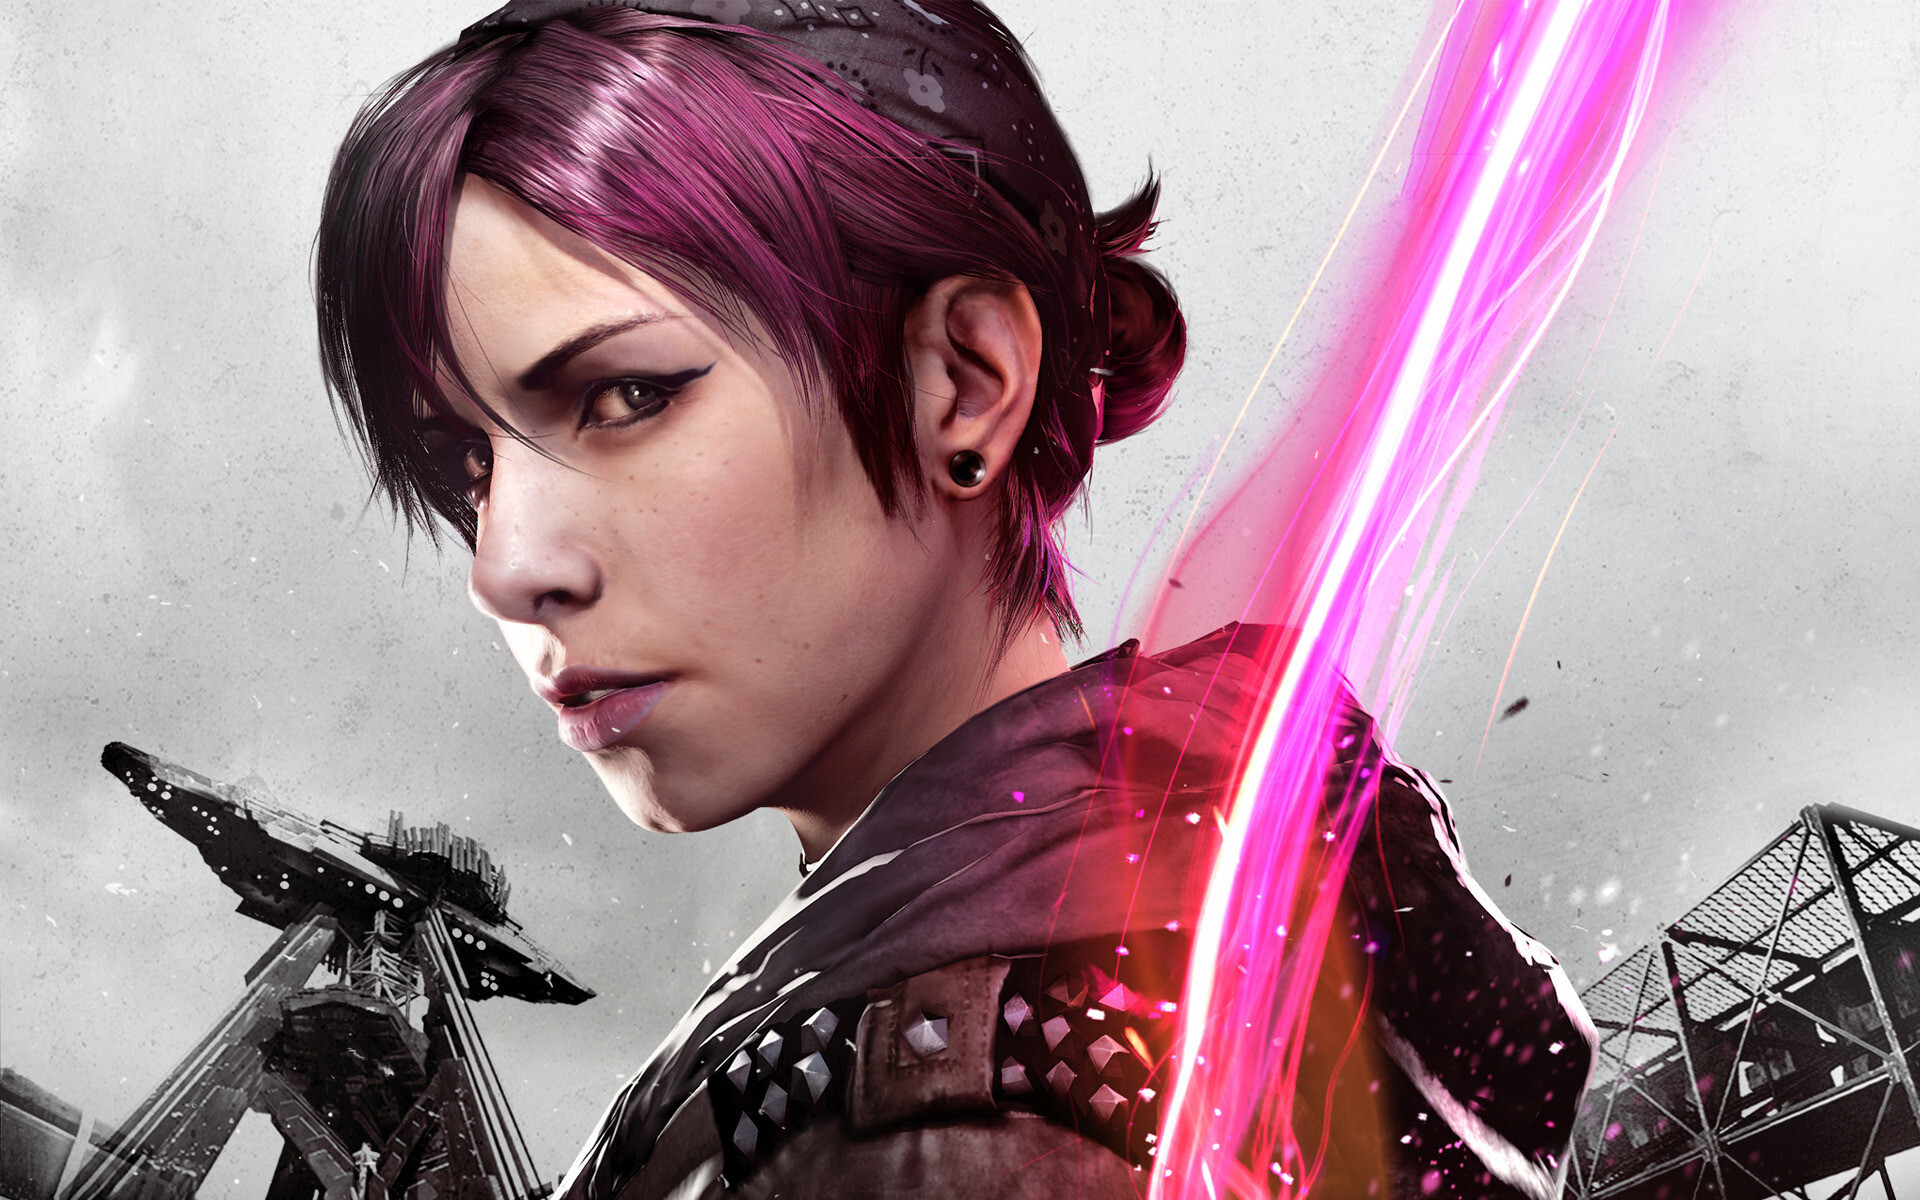 inFAMOUS: First Light, Players complete levels, defeat enemies and finish side missions. 1920x1200 HD Wallpaper.